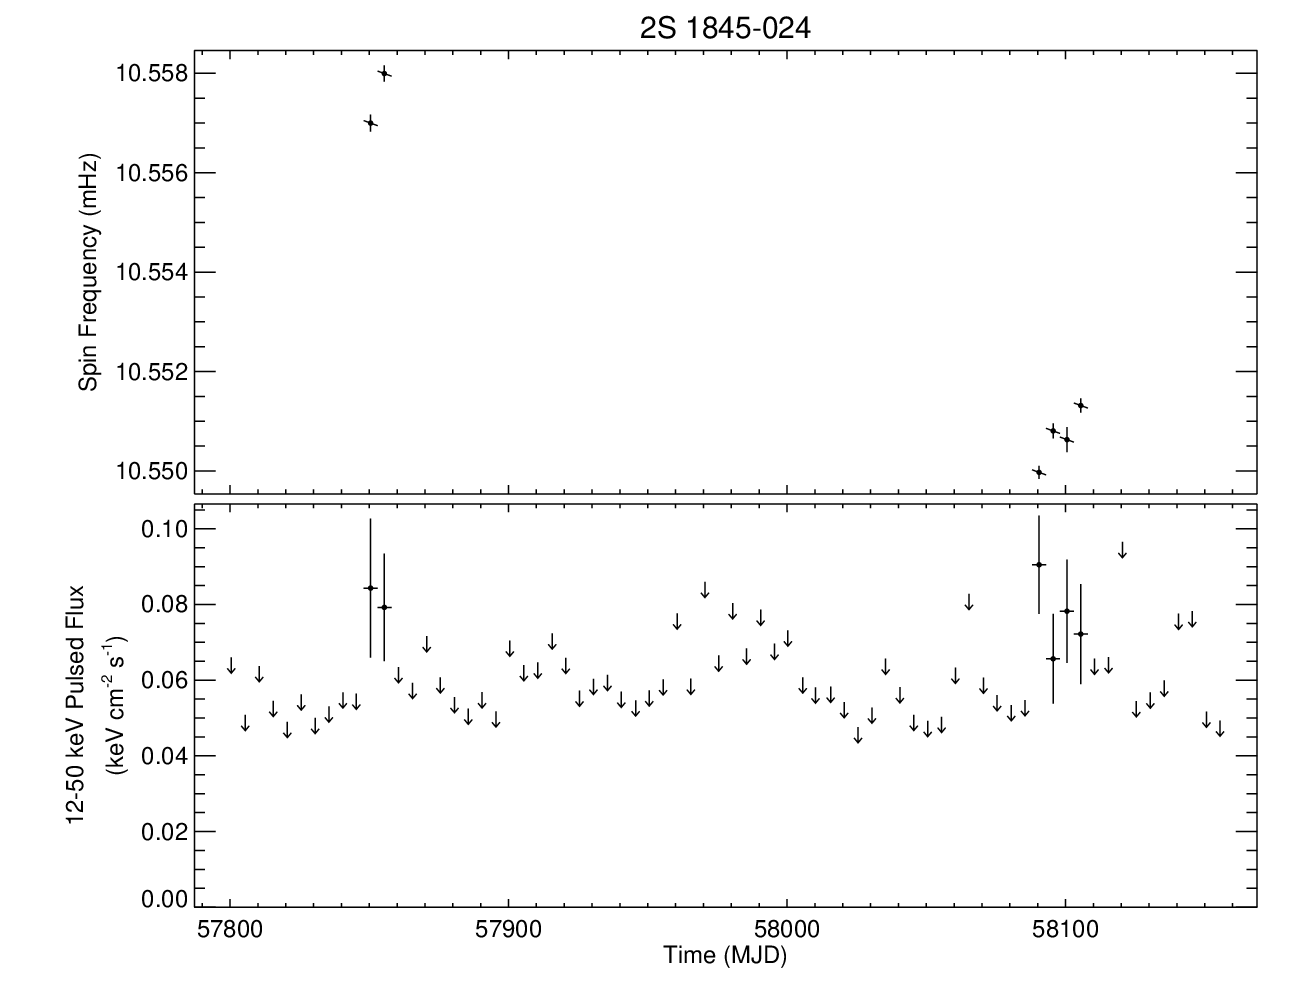 2S 1845-024 Short Frequency History